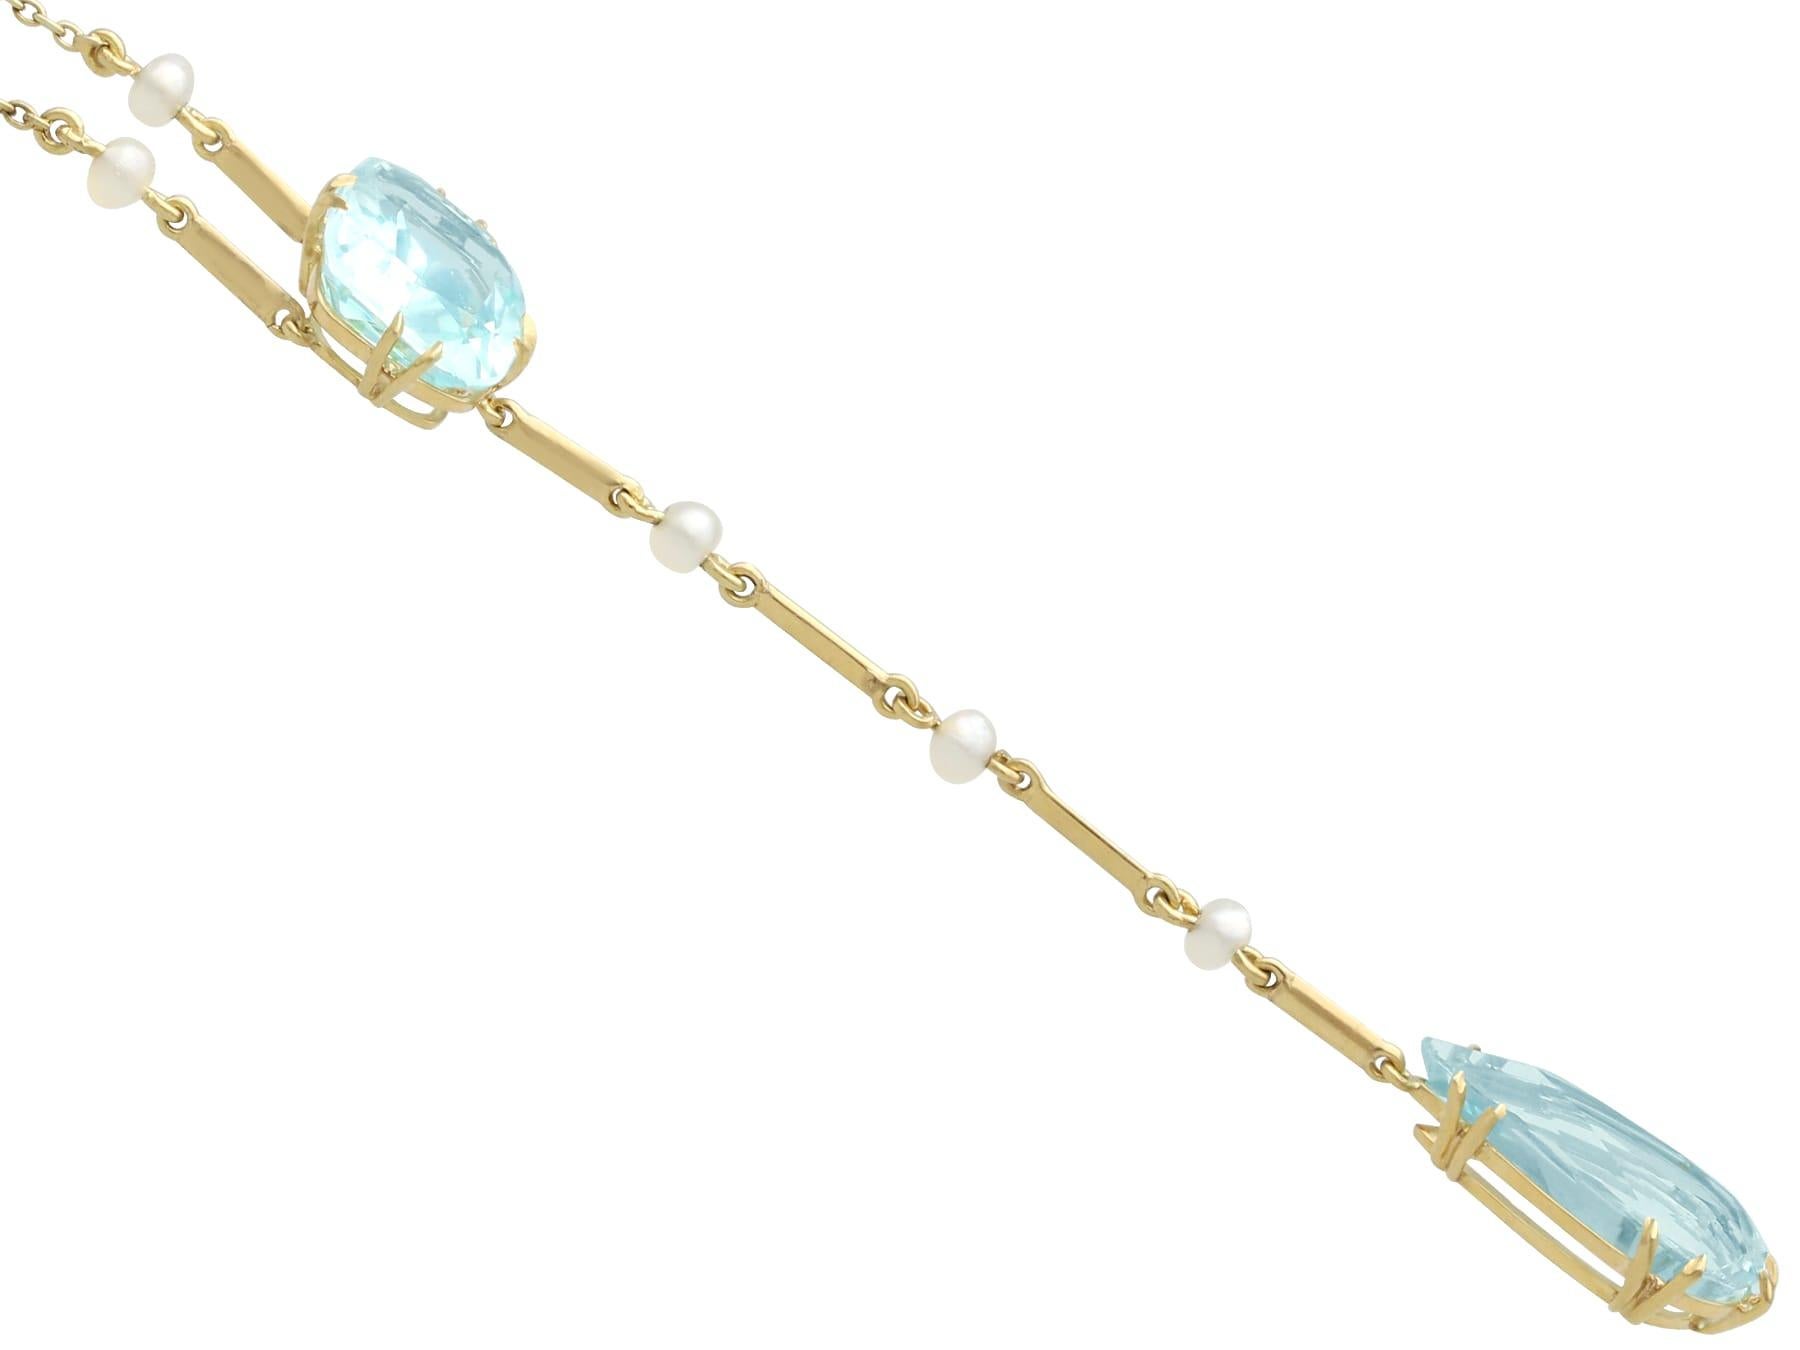 Pear Cut Antique 8.33 Carat Aquamarine and Seed Pearl 15 Carat Yellow Gold Necklace